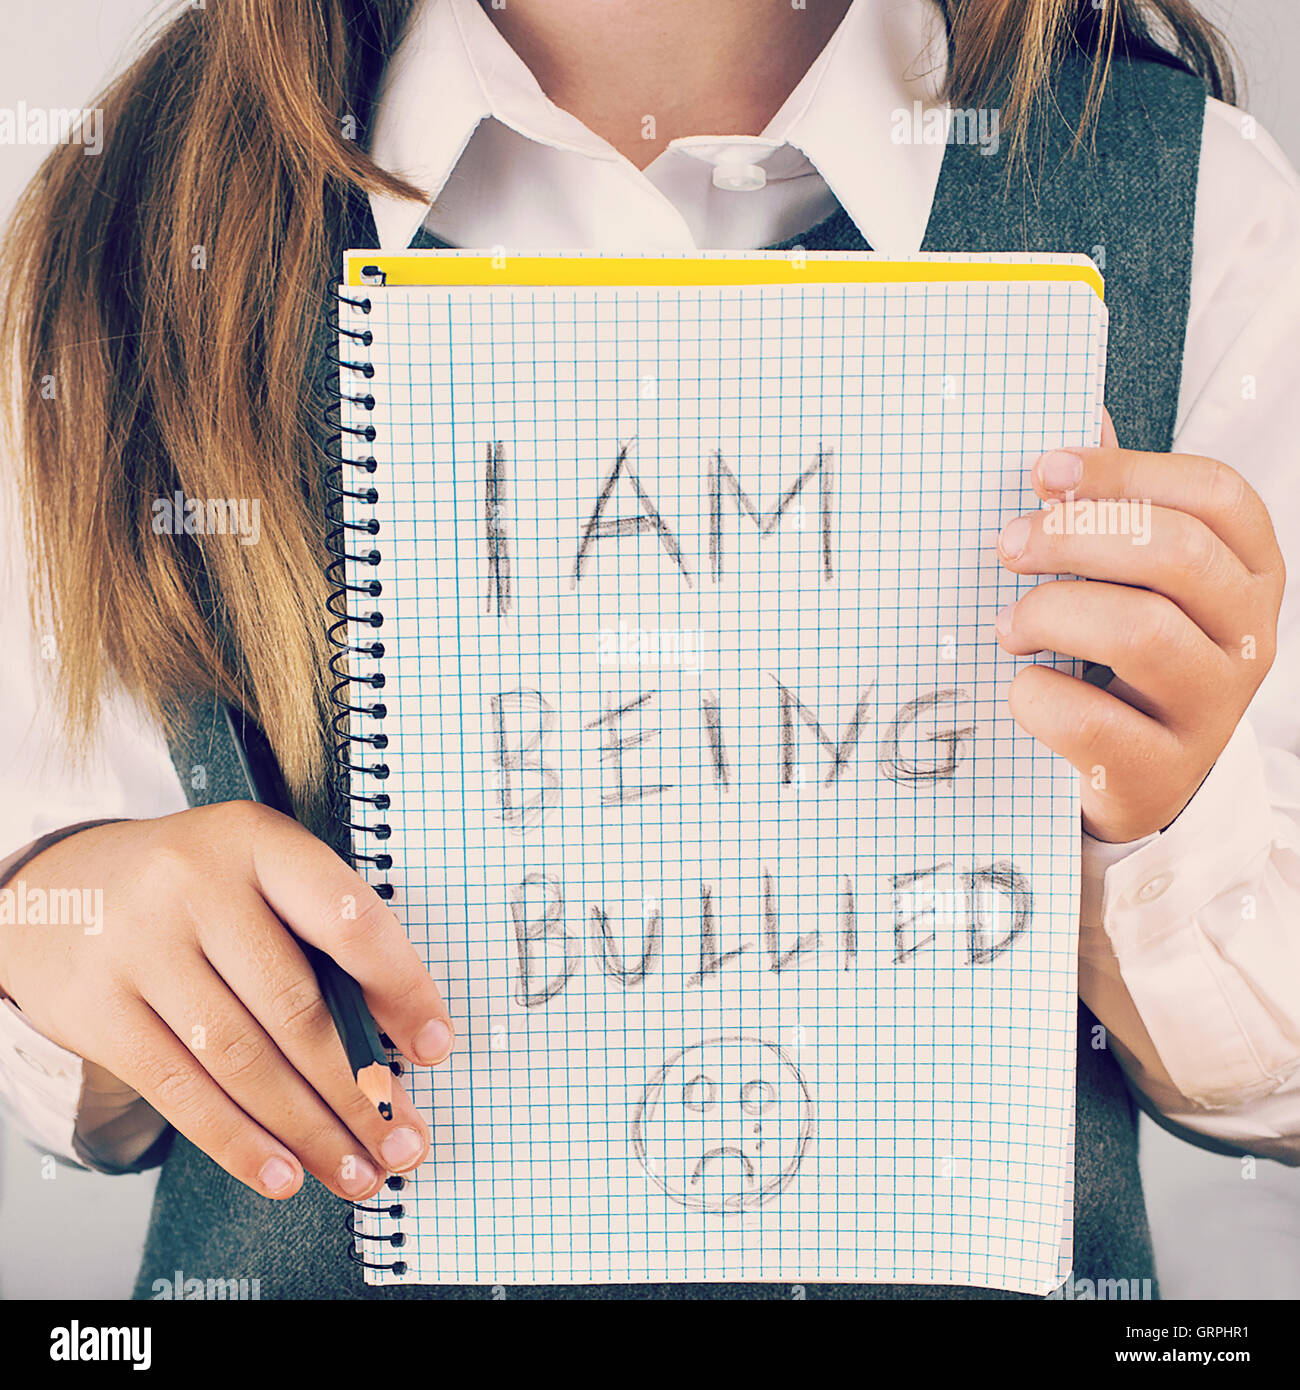 An image covering the Social Issues of child abuse,  schoolchild in uniform asking for help by a written message Stock Photo